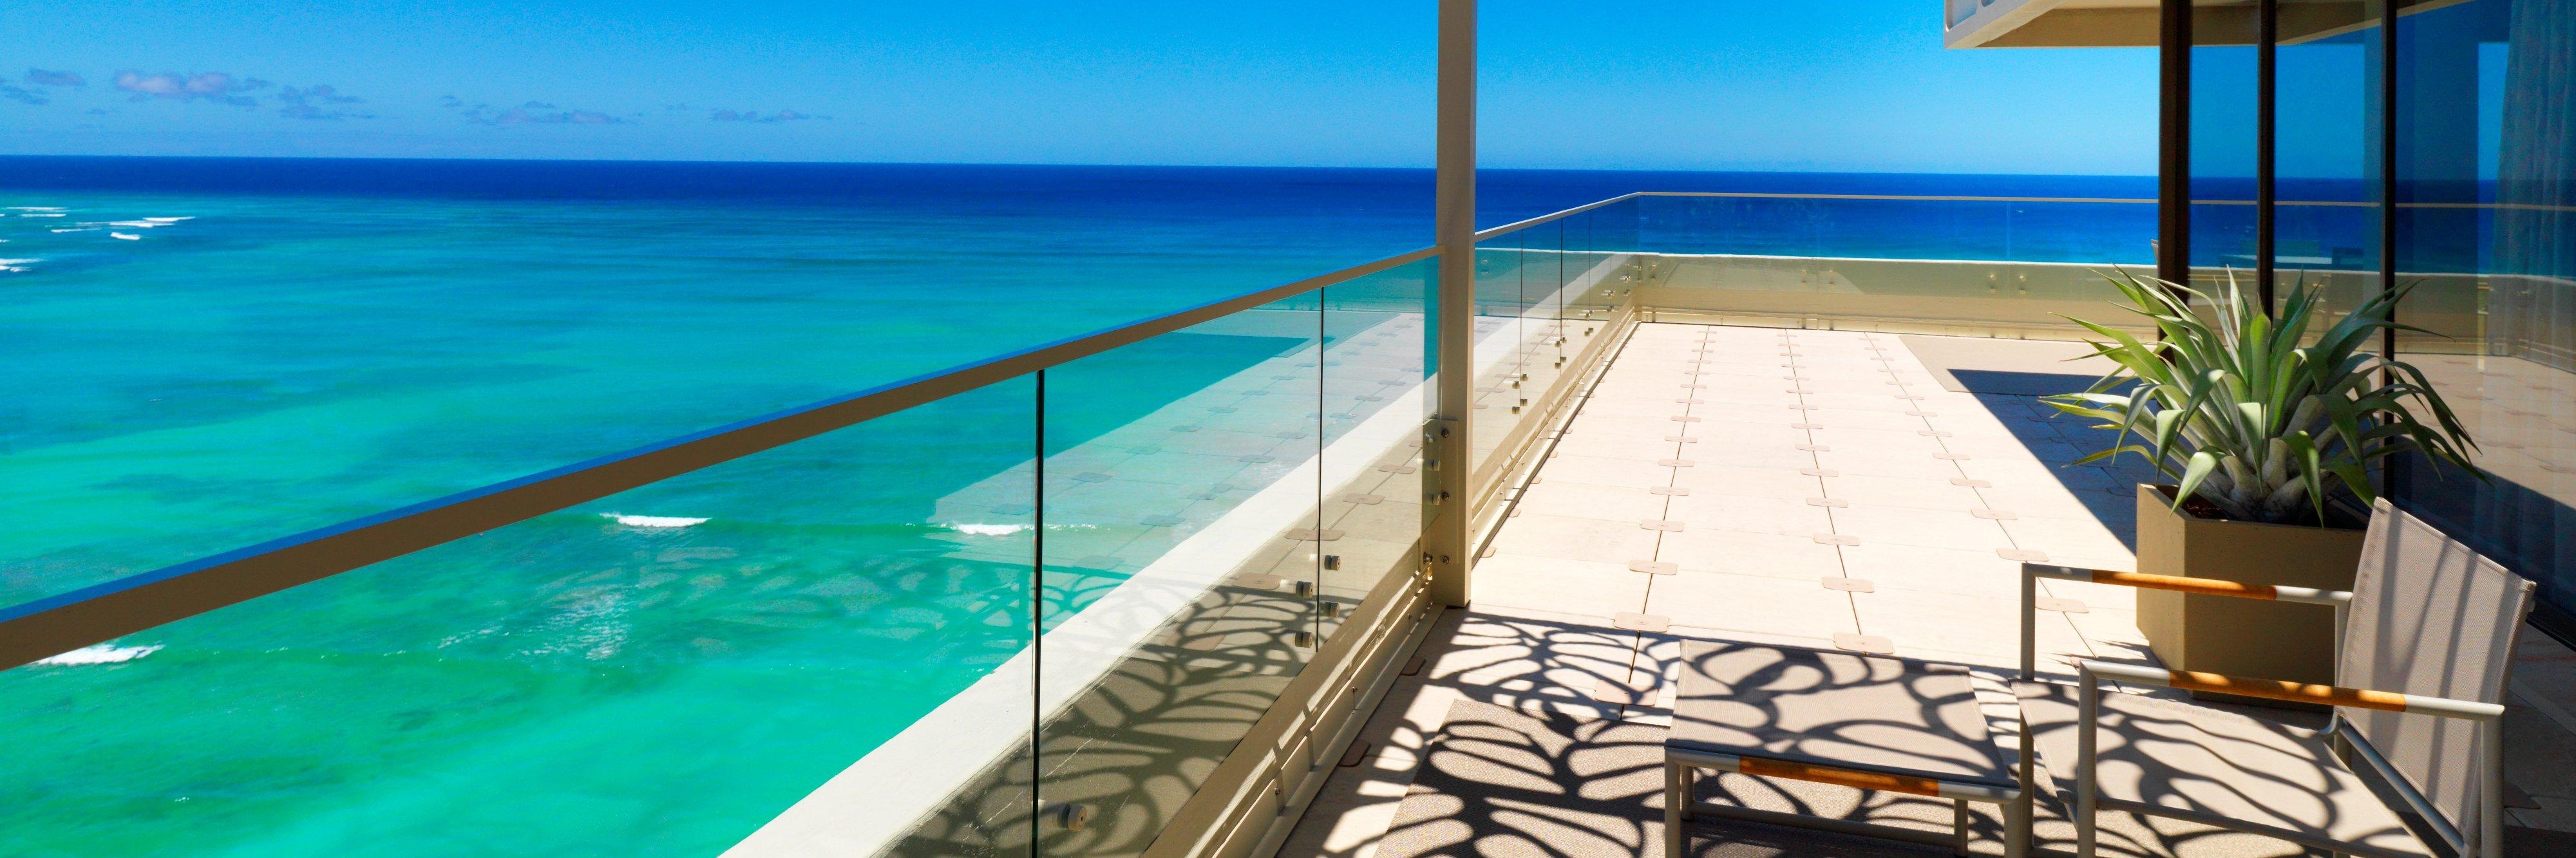 Guest suite balcony with ocean views